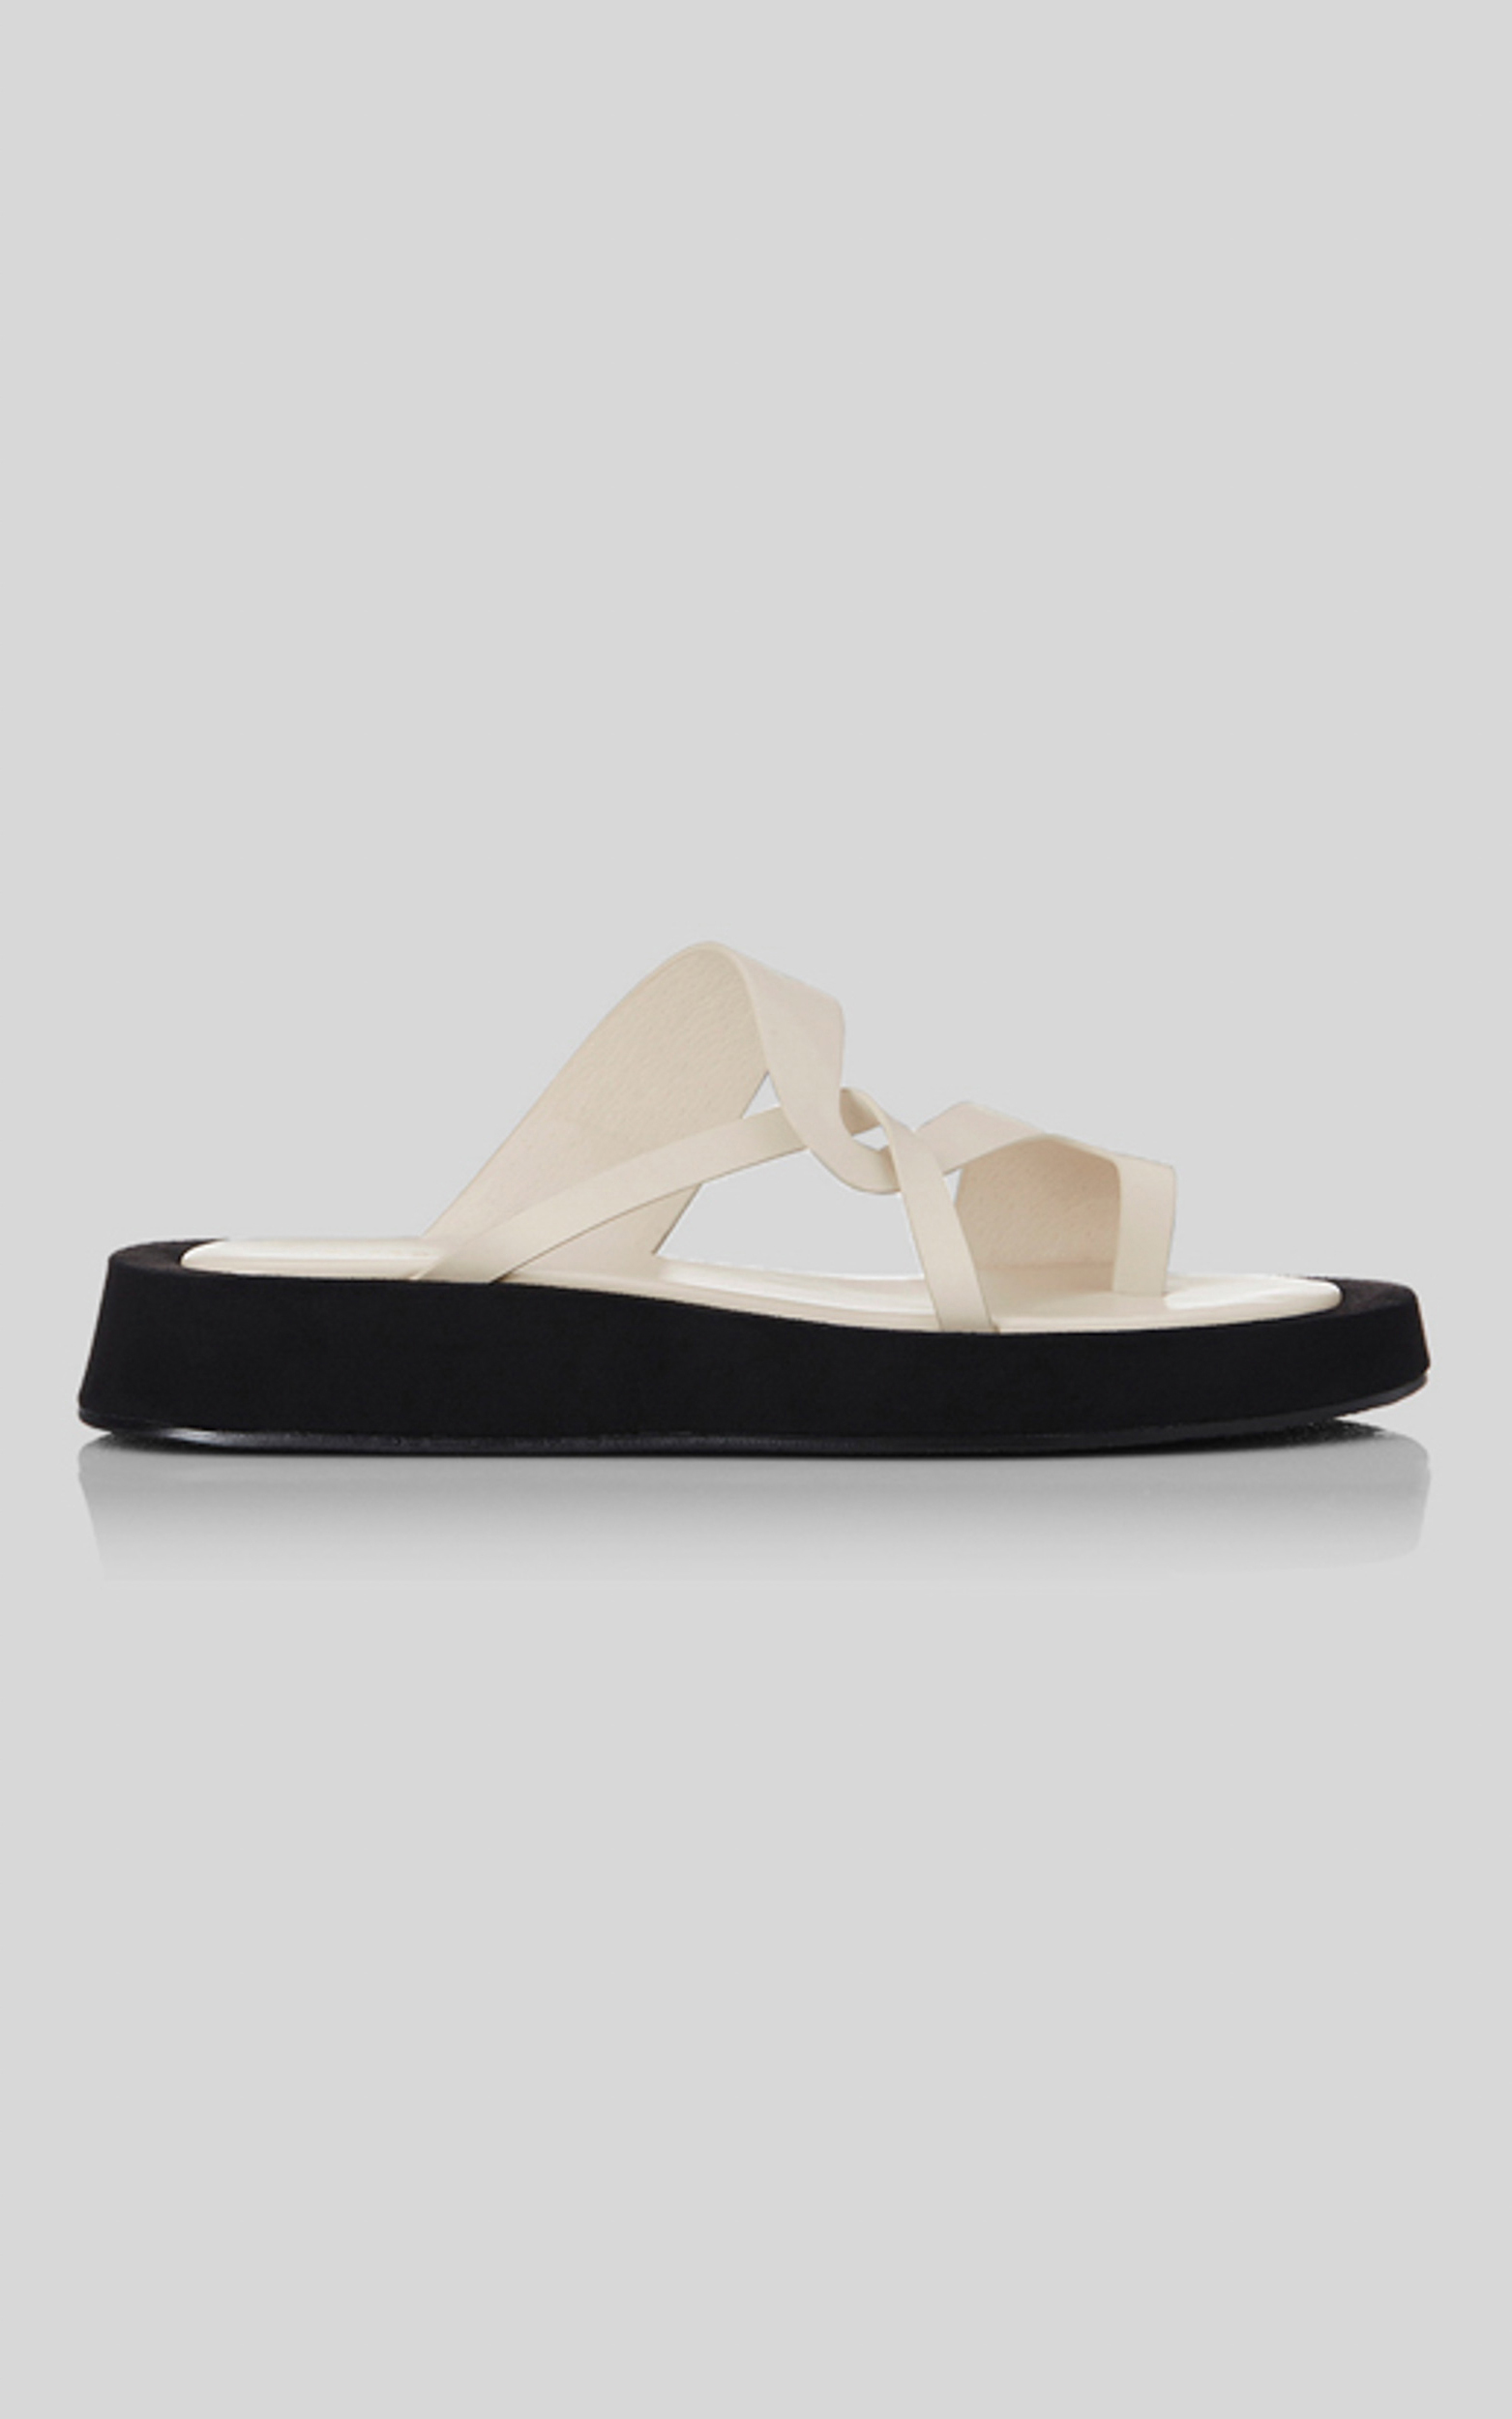 Alias Mae - Polo Sandals in Bone Leather - 05, NEU2, hi-res image number null